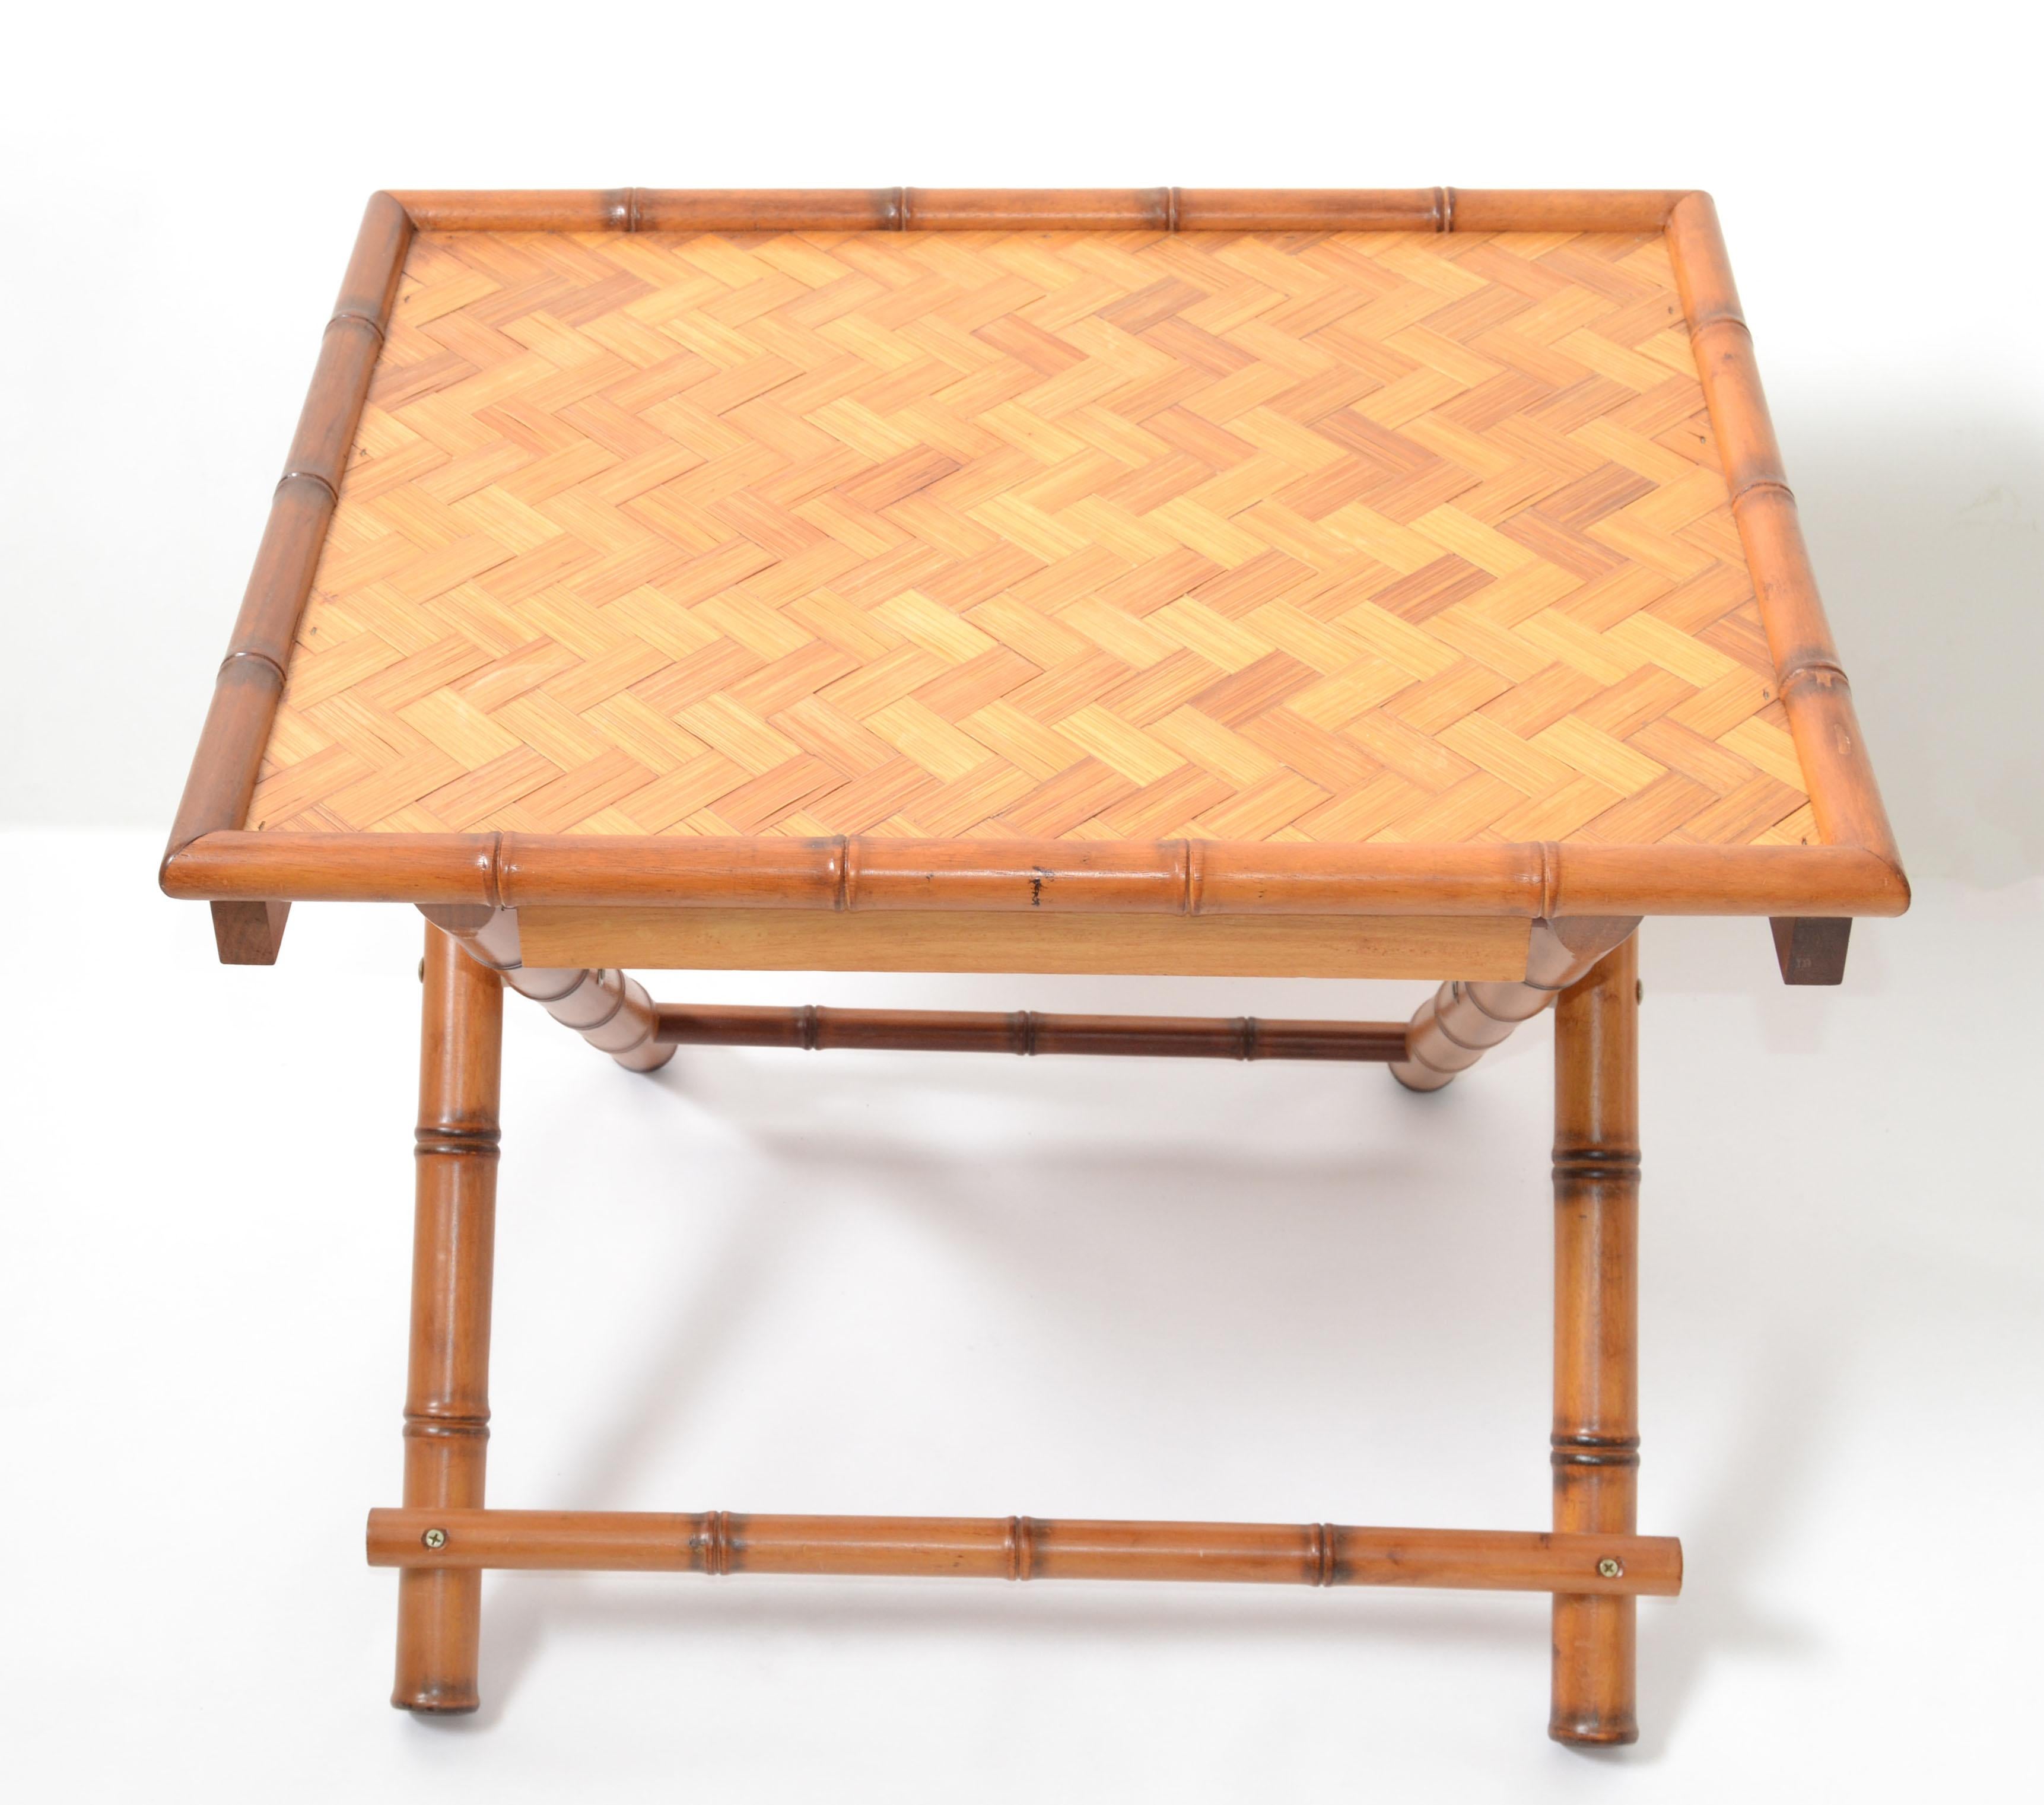 Vintage Handcrafted Rectangle Bamboo Serving Folding Table, Center Table X-Base (Rattan) im Angebot